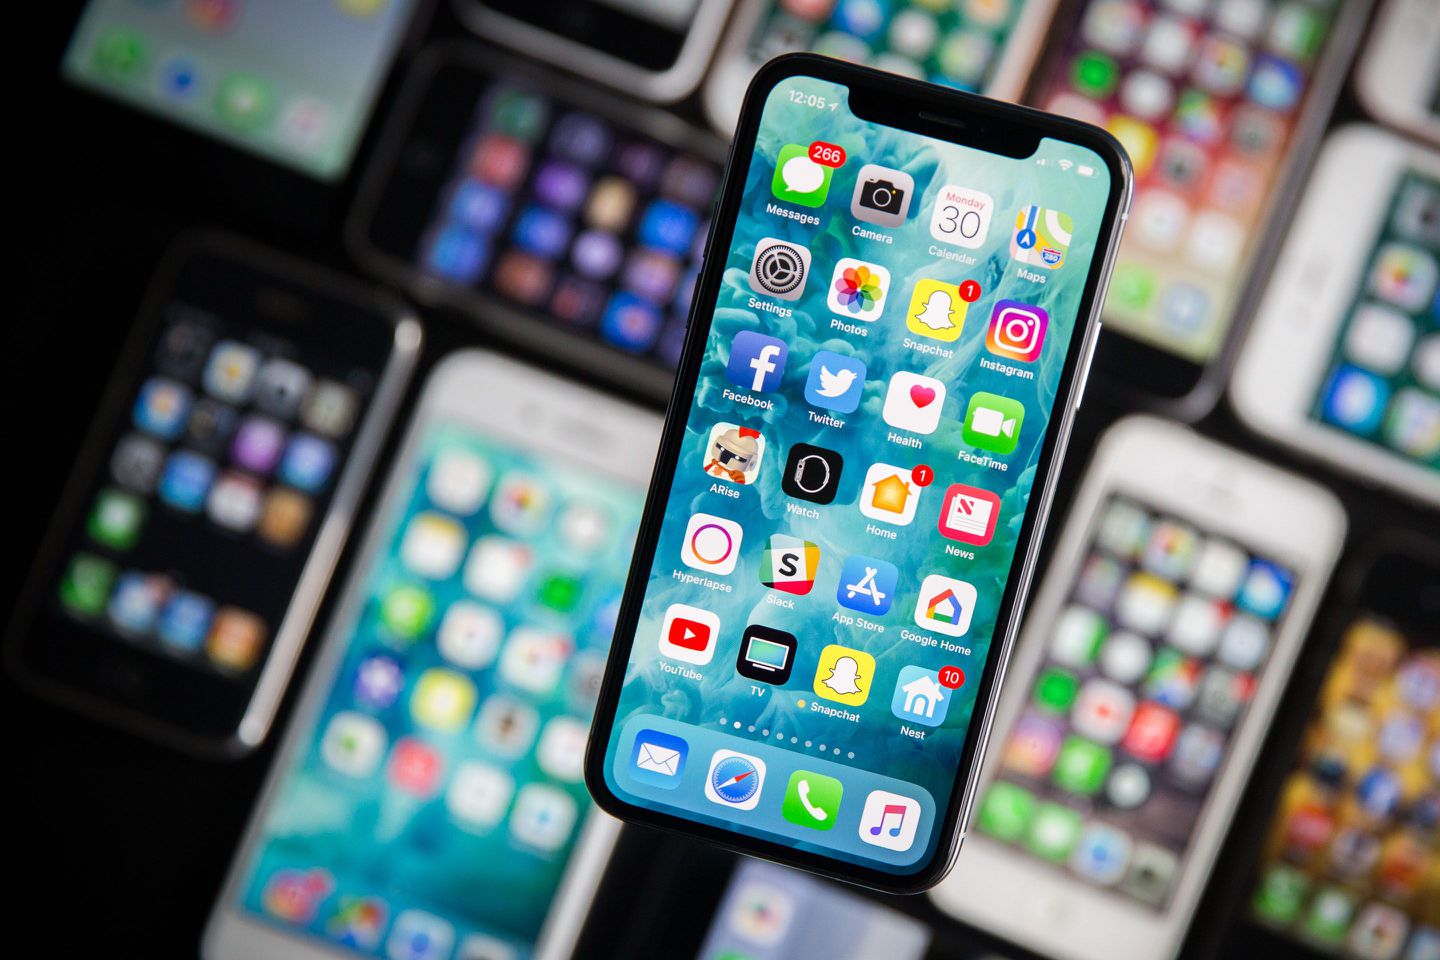 Apple will reportedly use OLED displays for all three 2019 iPhones